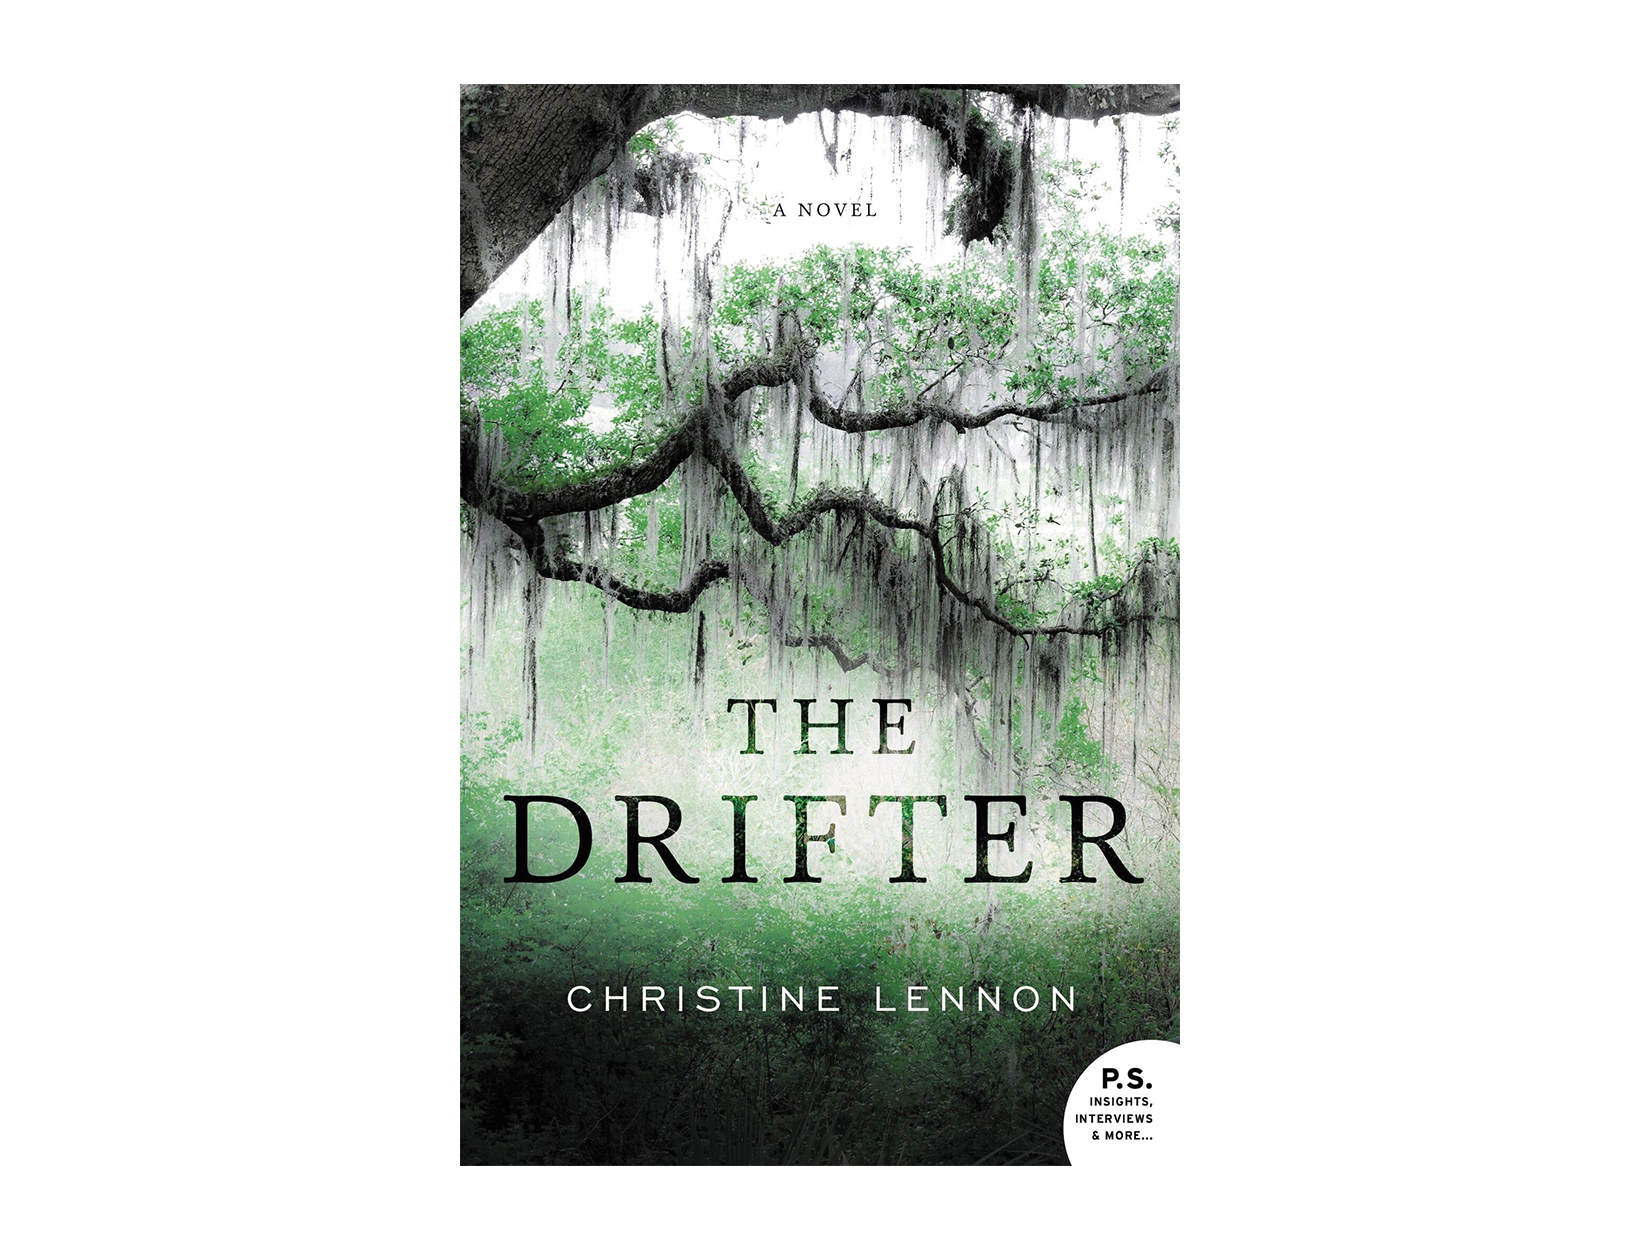 The Drifter by Christine Lennon